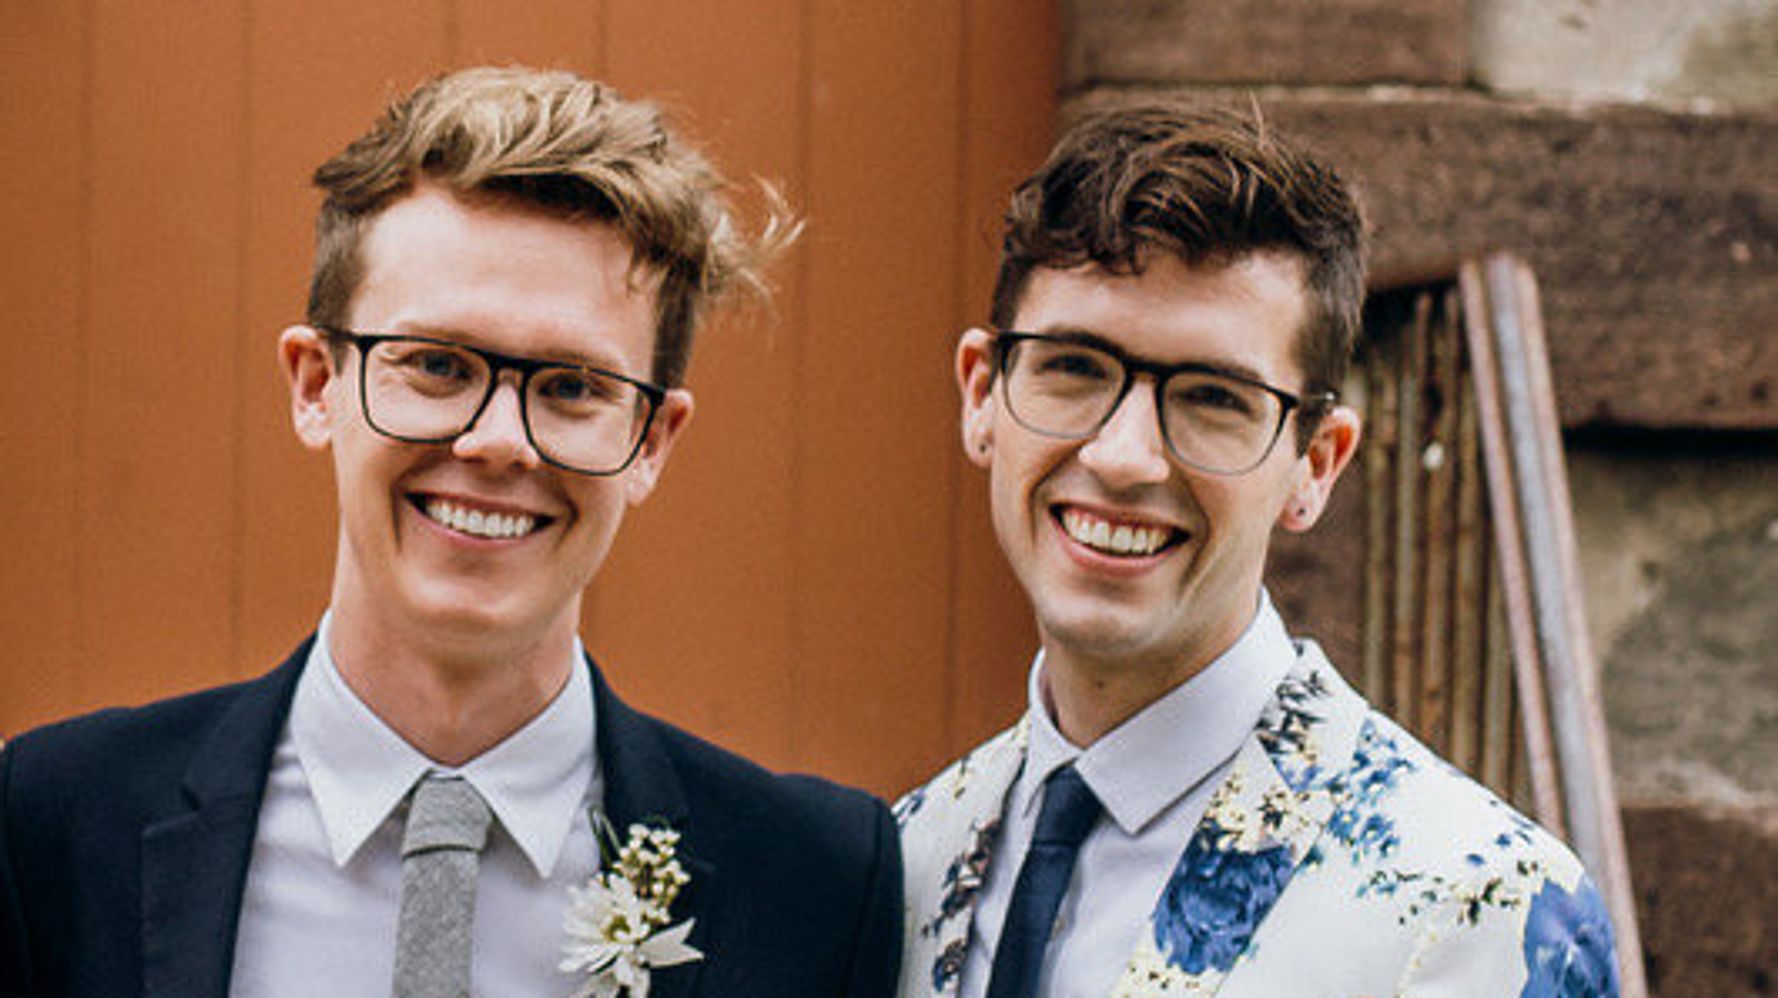 Husband And Two Gays - My Two Sons Came Out As Gay And It Almost Destroyed Me ...